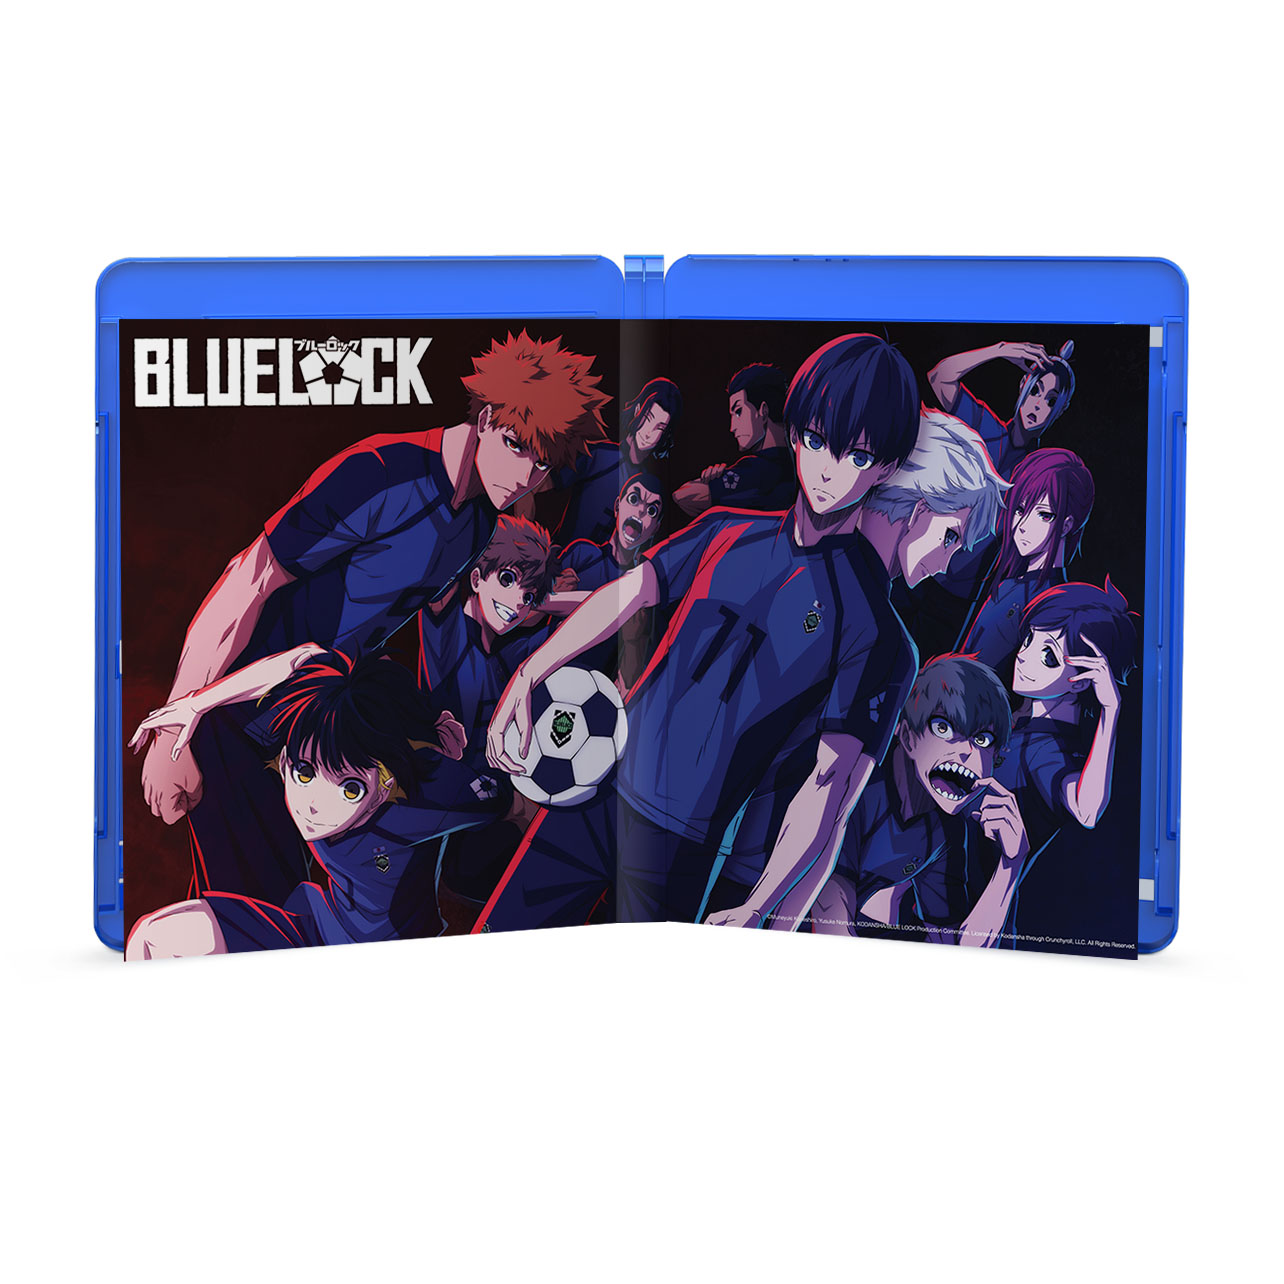 BLUELOCK - Part 1 - Blu-ray + DVD image count 5